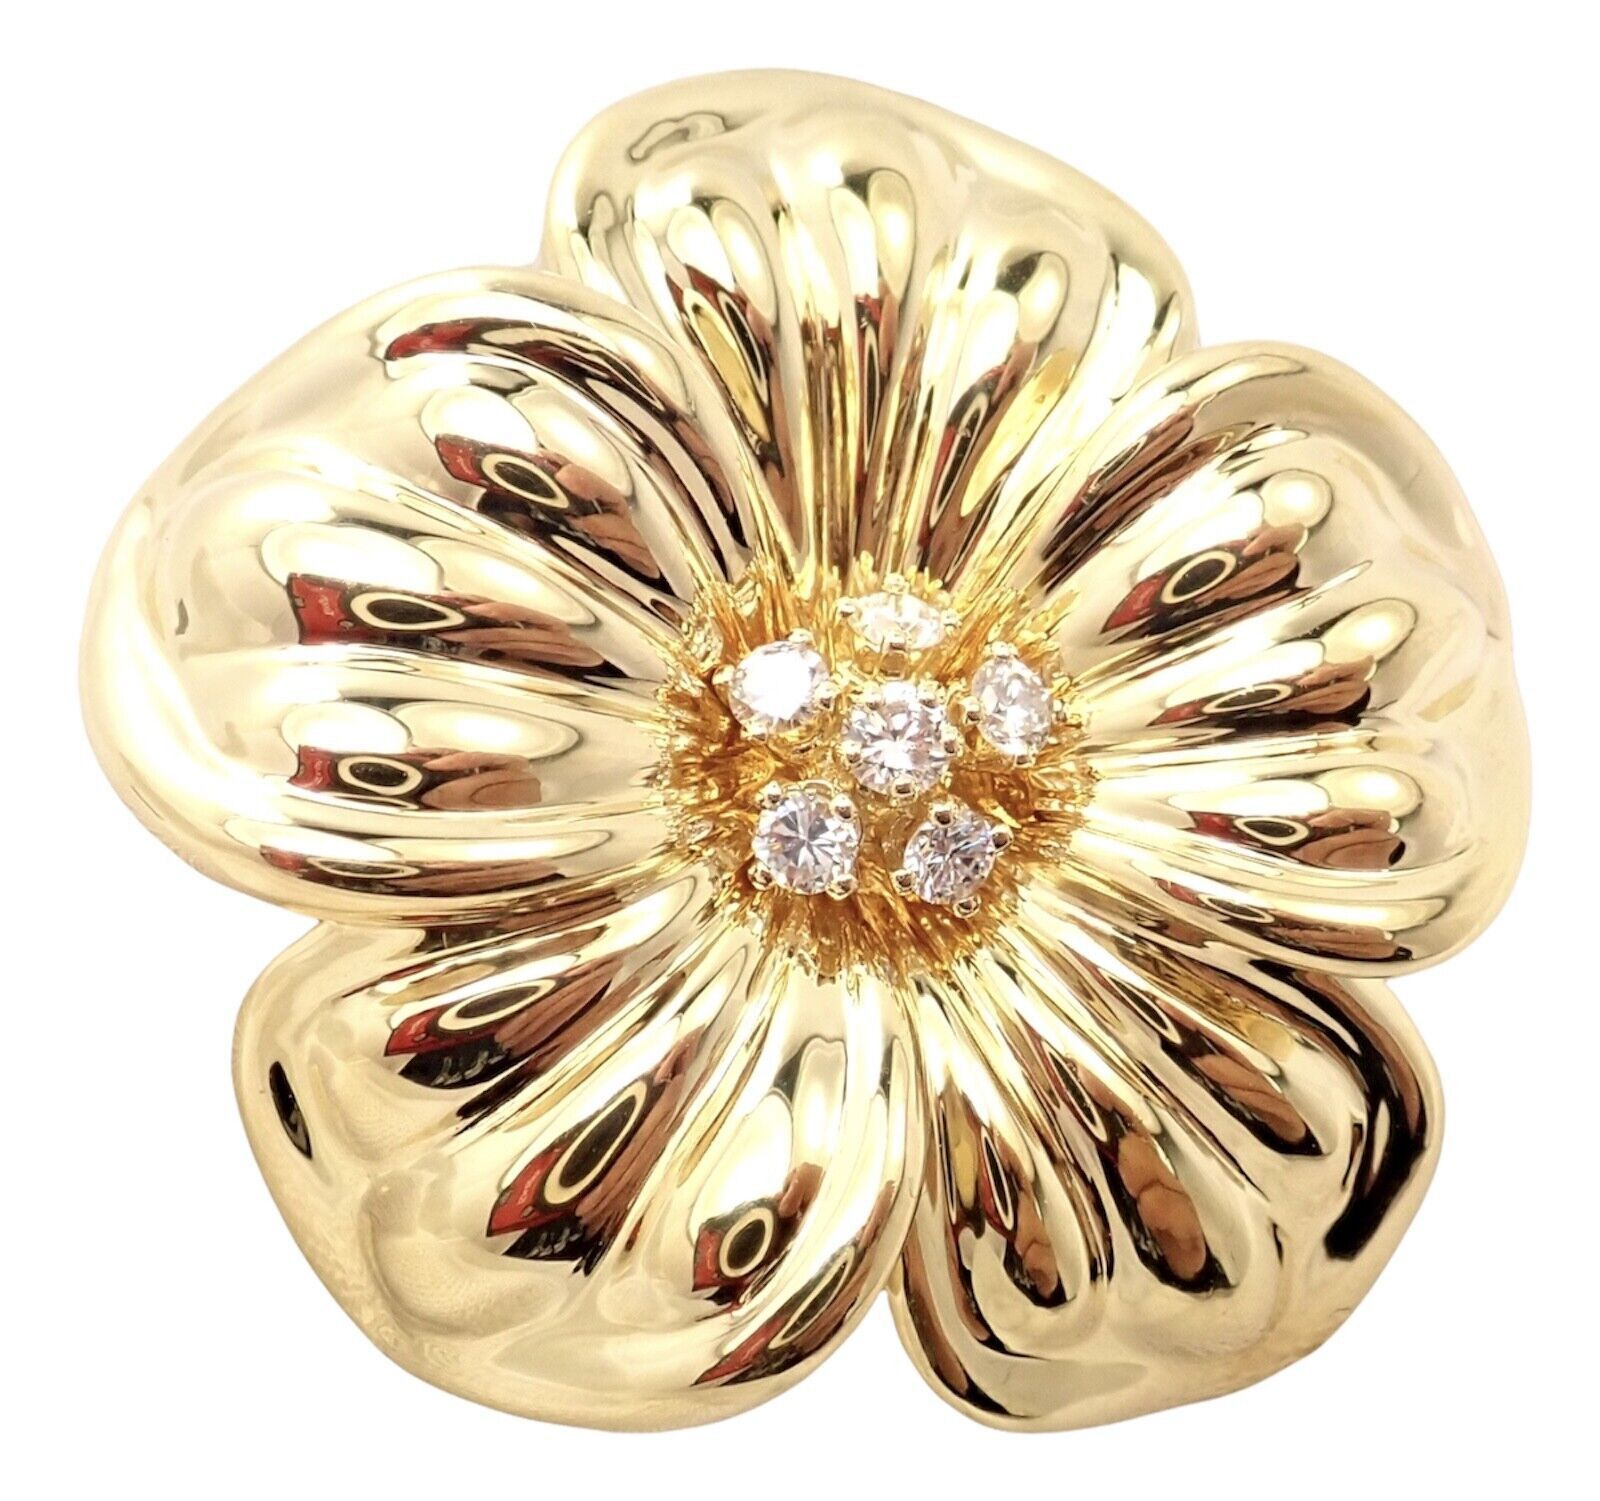 Van Cleef & Arpels Diamond 18k Yellow Gold Magnolia Flower Pin Brooch Size ONE SIZE - 3 Thumbnail